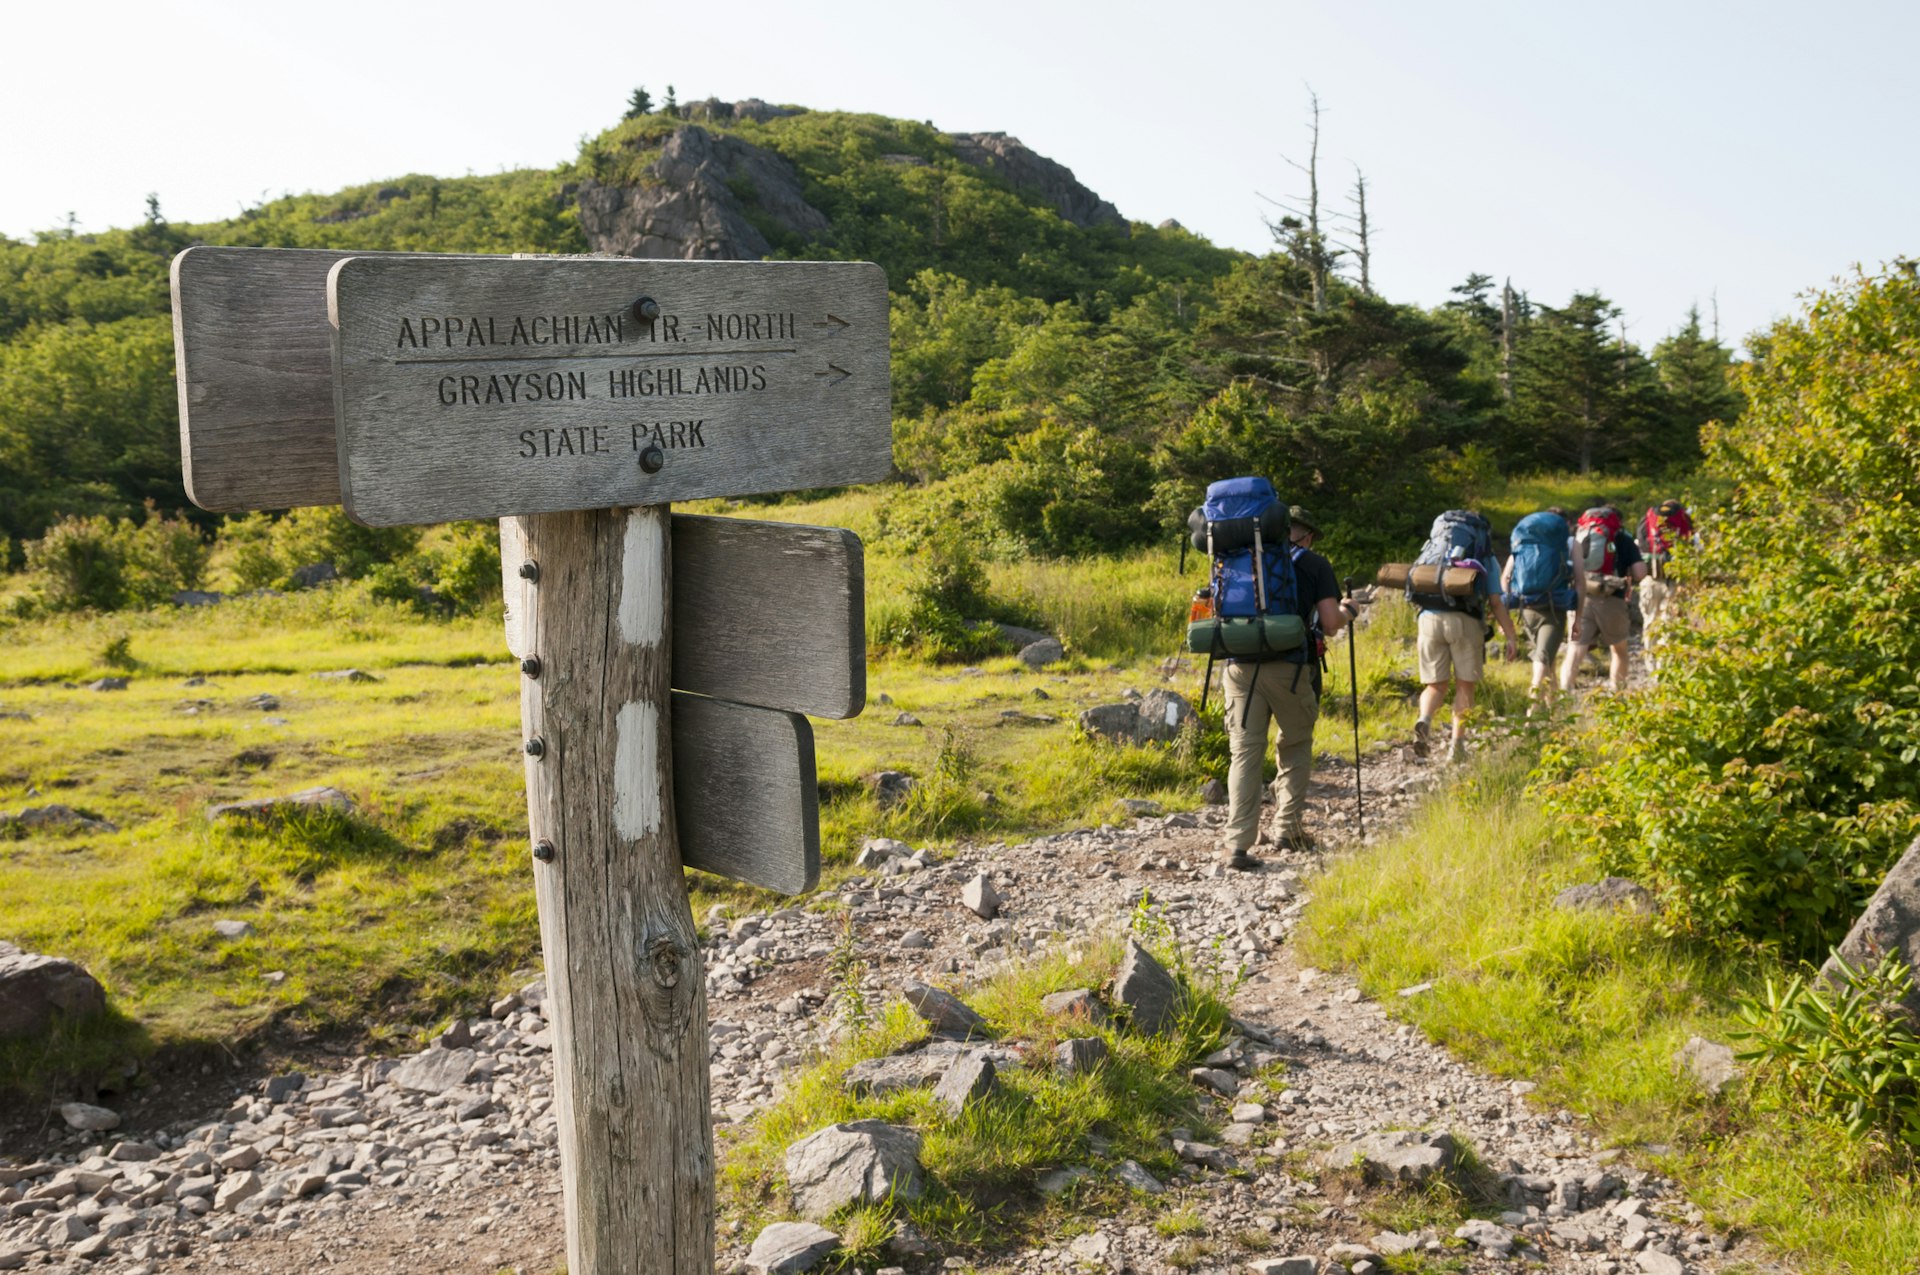 Hikers with full backpacks walk along a trail signposted Appalachian Trail North